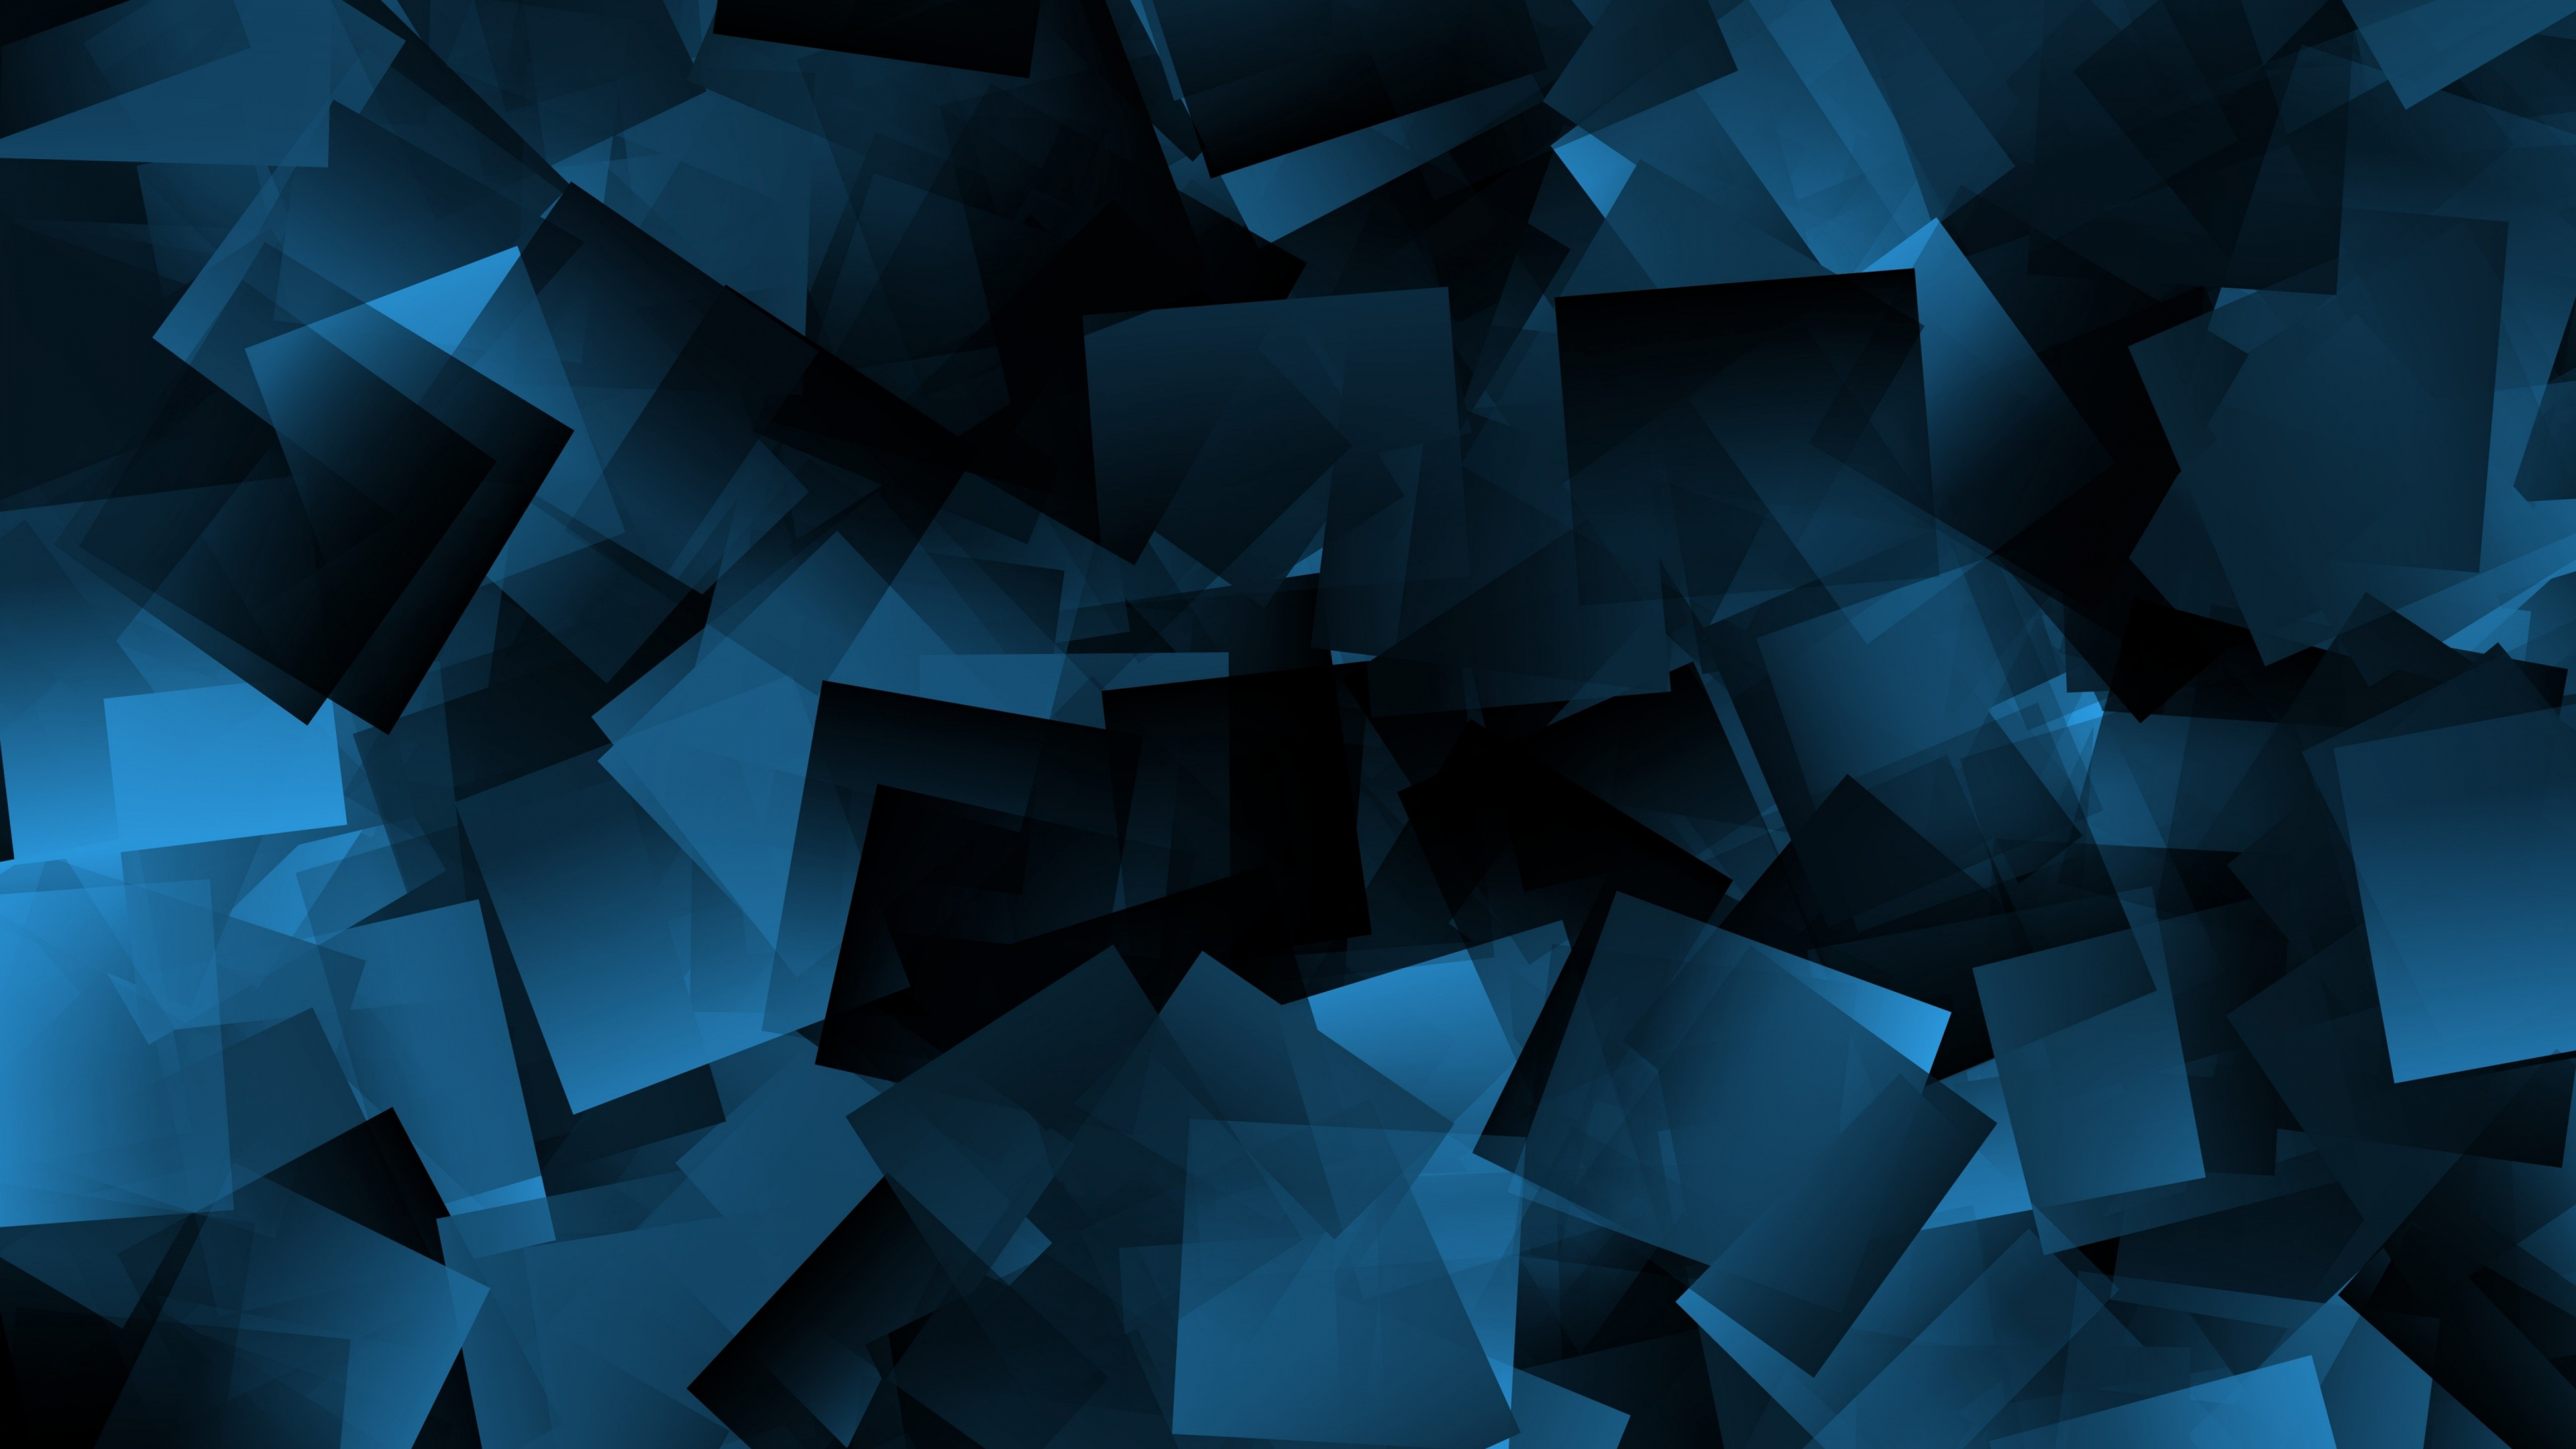 Blue and White Abstract Painting. Wallpaper in 3840x2160 Resolution